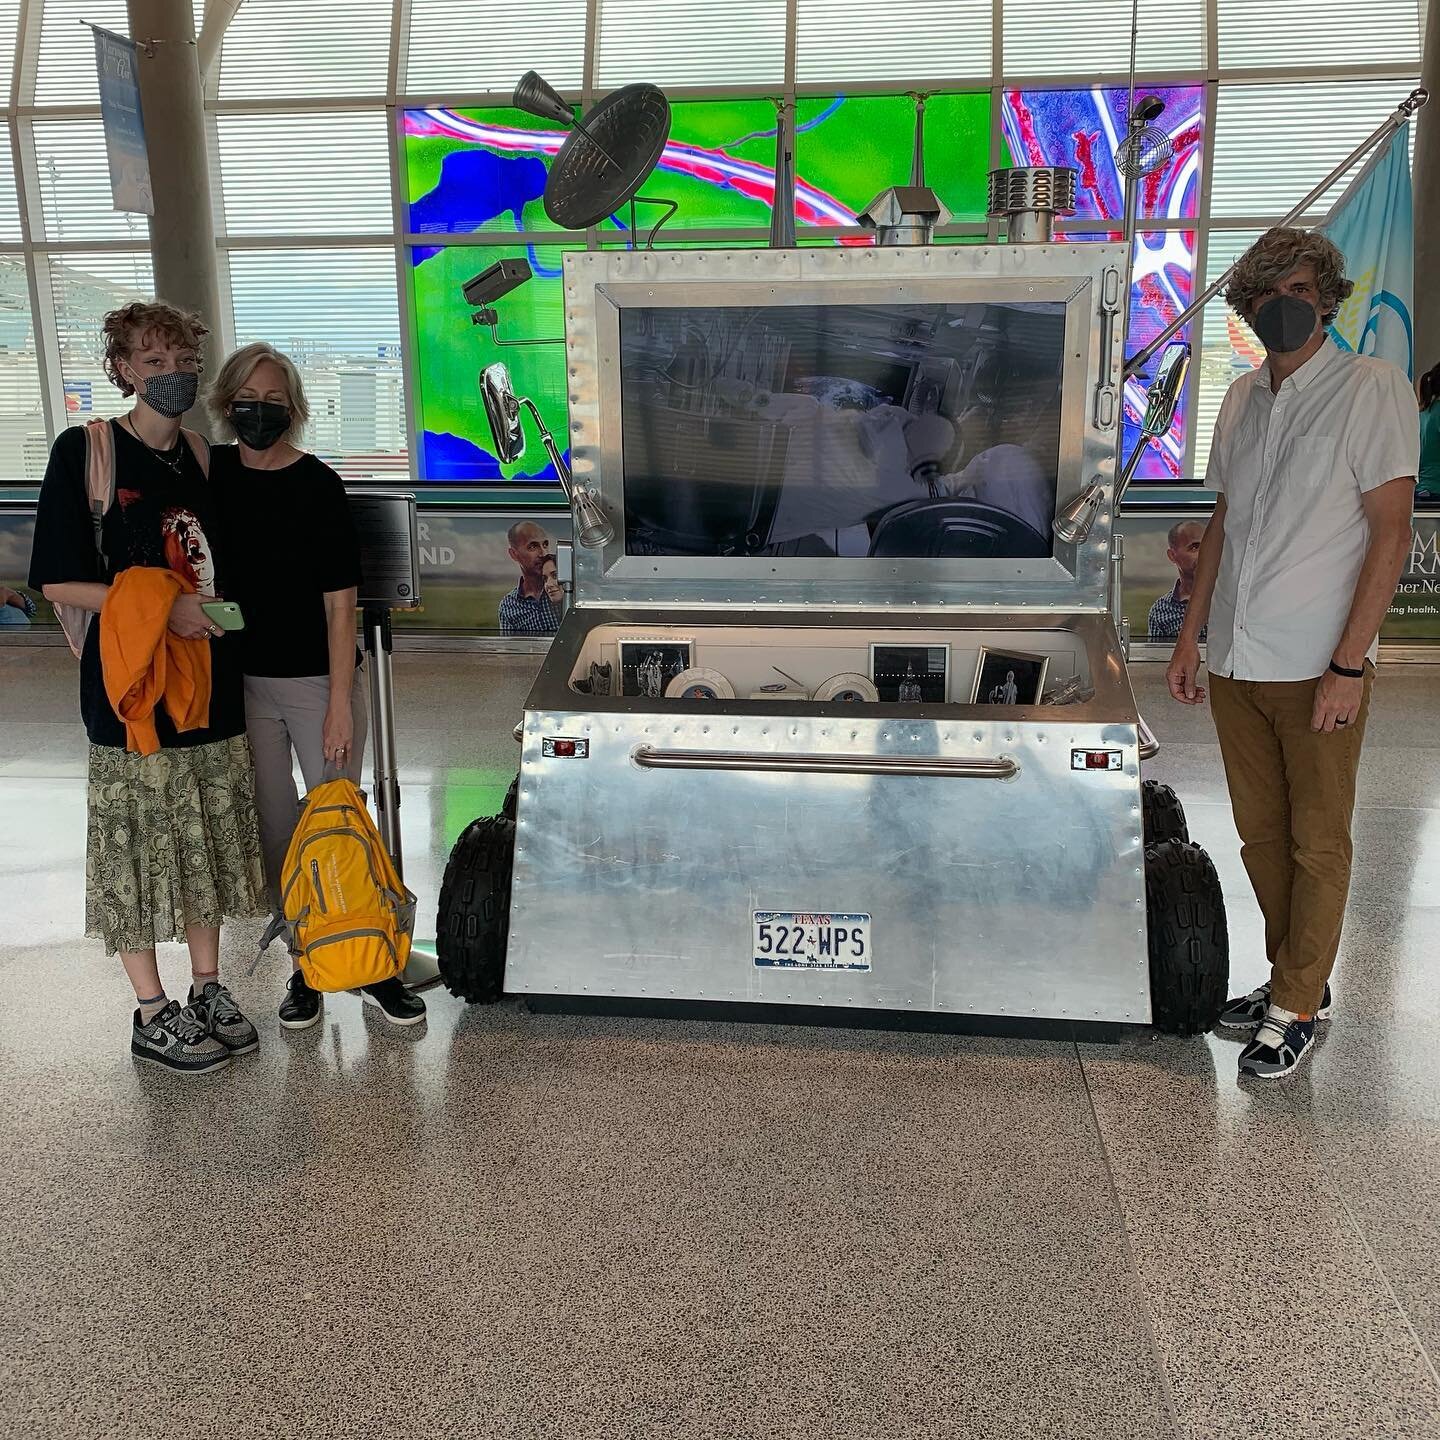 Traveling through Hobby Airport today!!! Stopping in front of our favorite work &ldquo;Higher Ground.&rdquo; The kids were to embarrassed to take the picture in front of the moon rover😂🥰
.
From little kids to teenagers!! Wow! How they have grown!!
